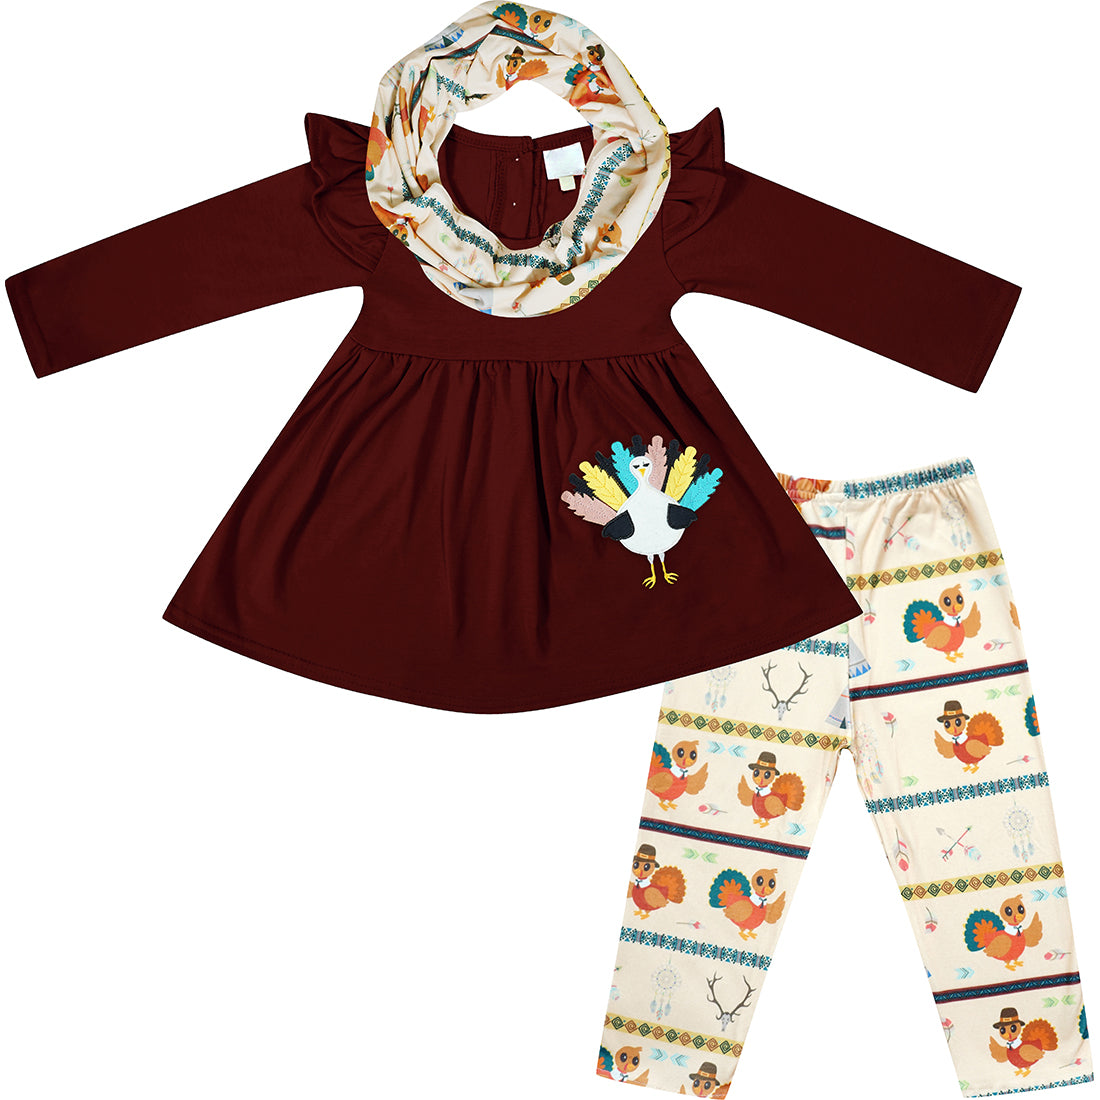 Baby Toddler Little Girls Happy Thanksgiving Turkey Aztec Tribal Scarf Ivory Brown Top Legging Scarf Outfit Set - Angeline Kids